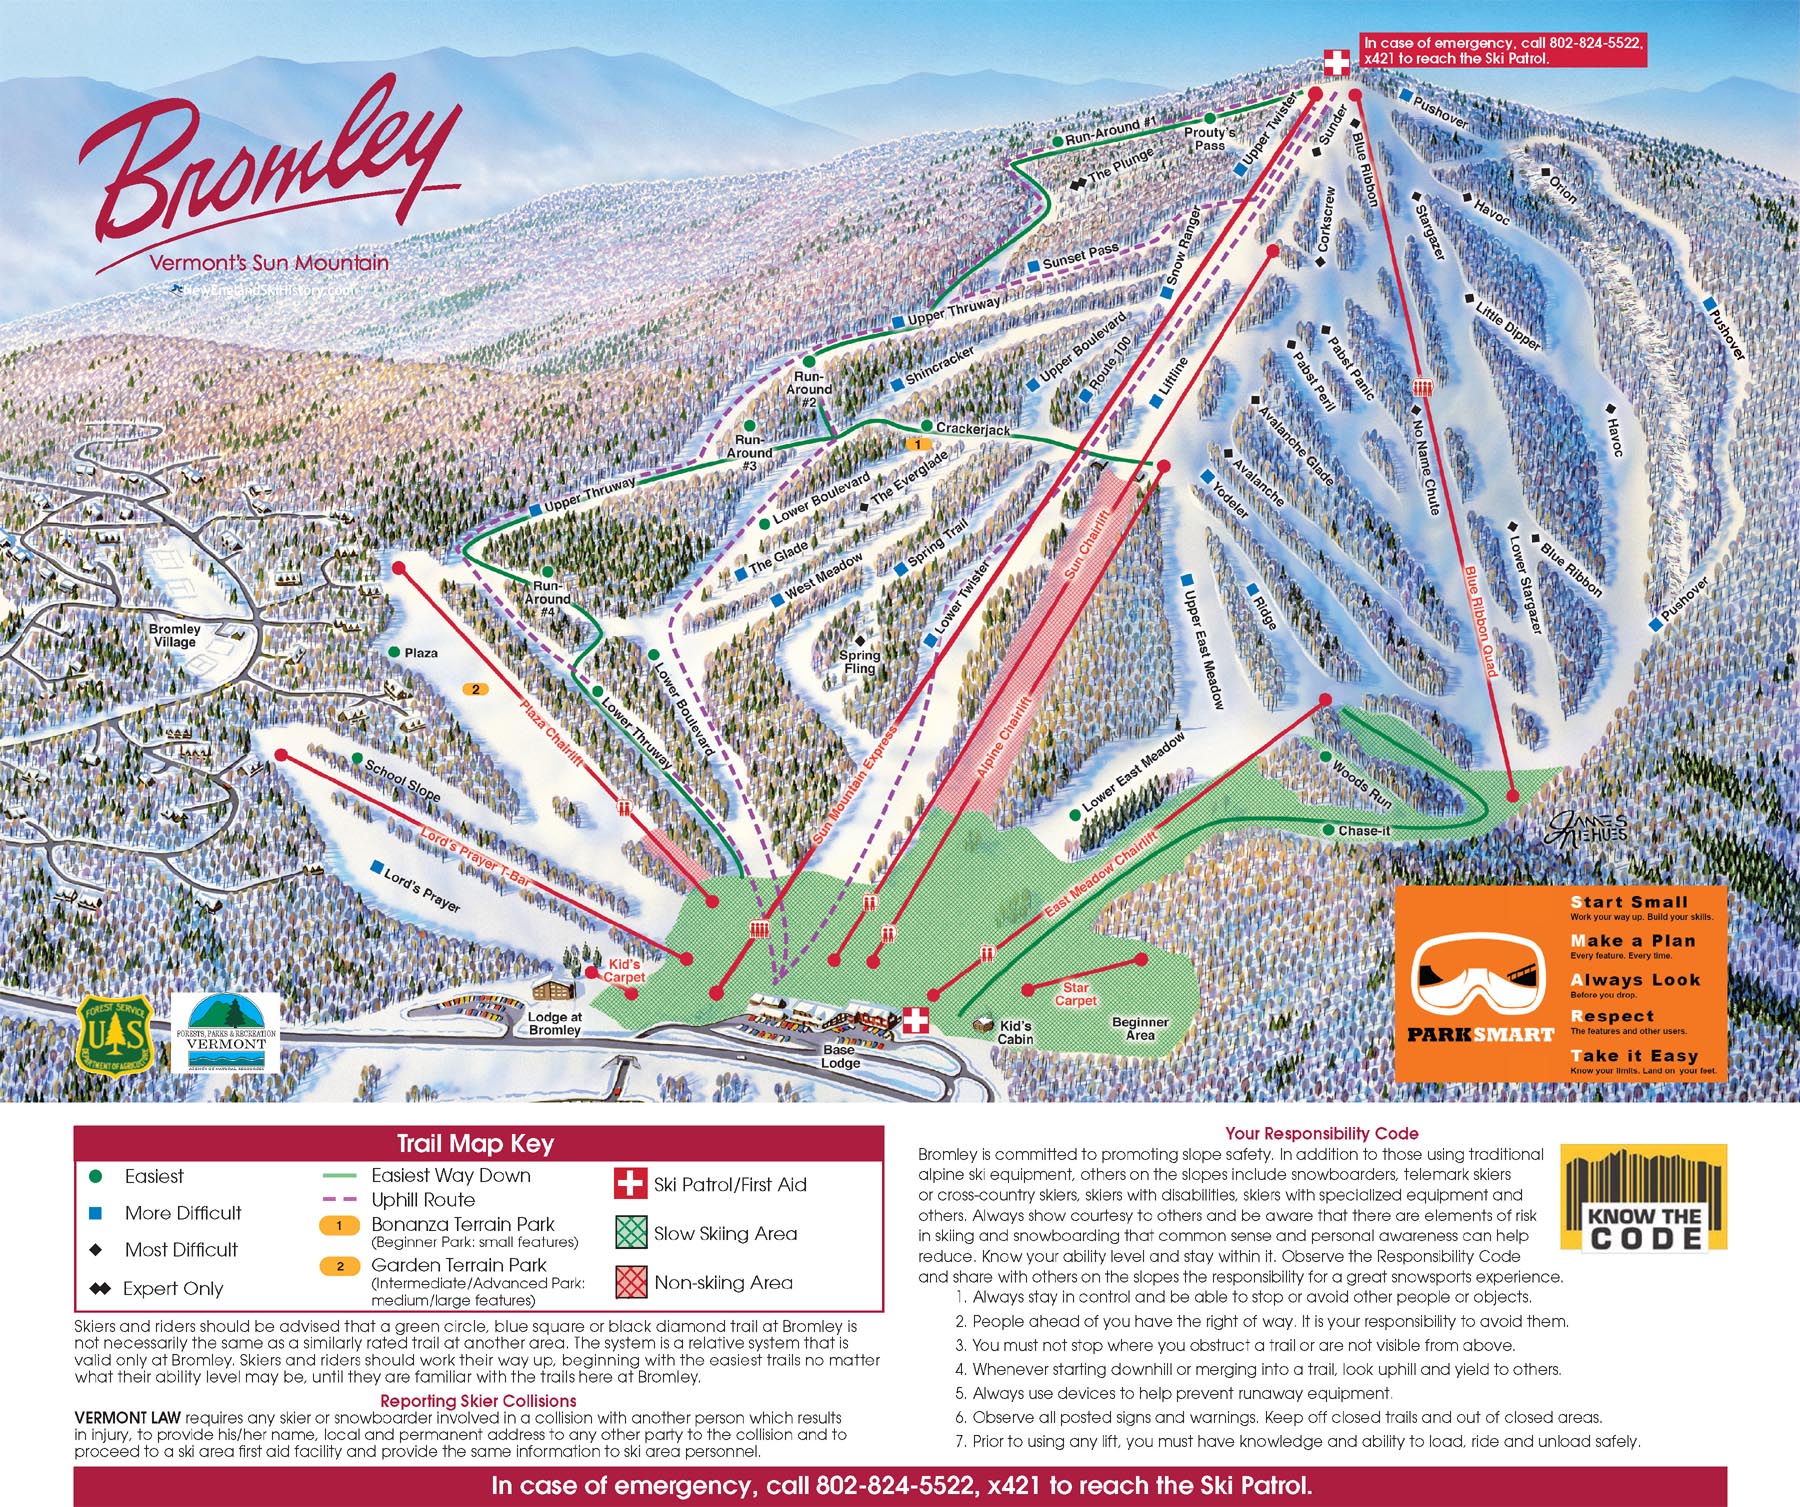 2019-20 Bromley Trail Map